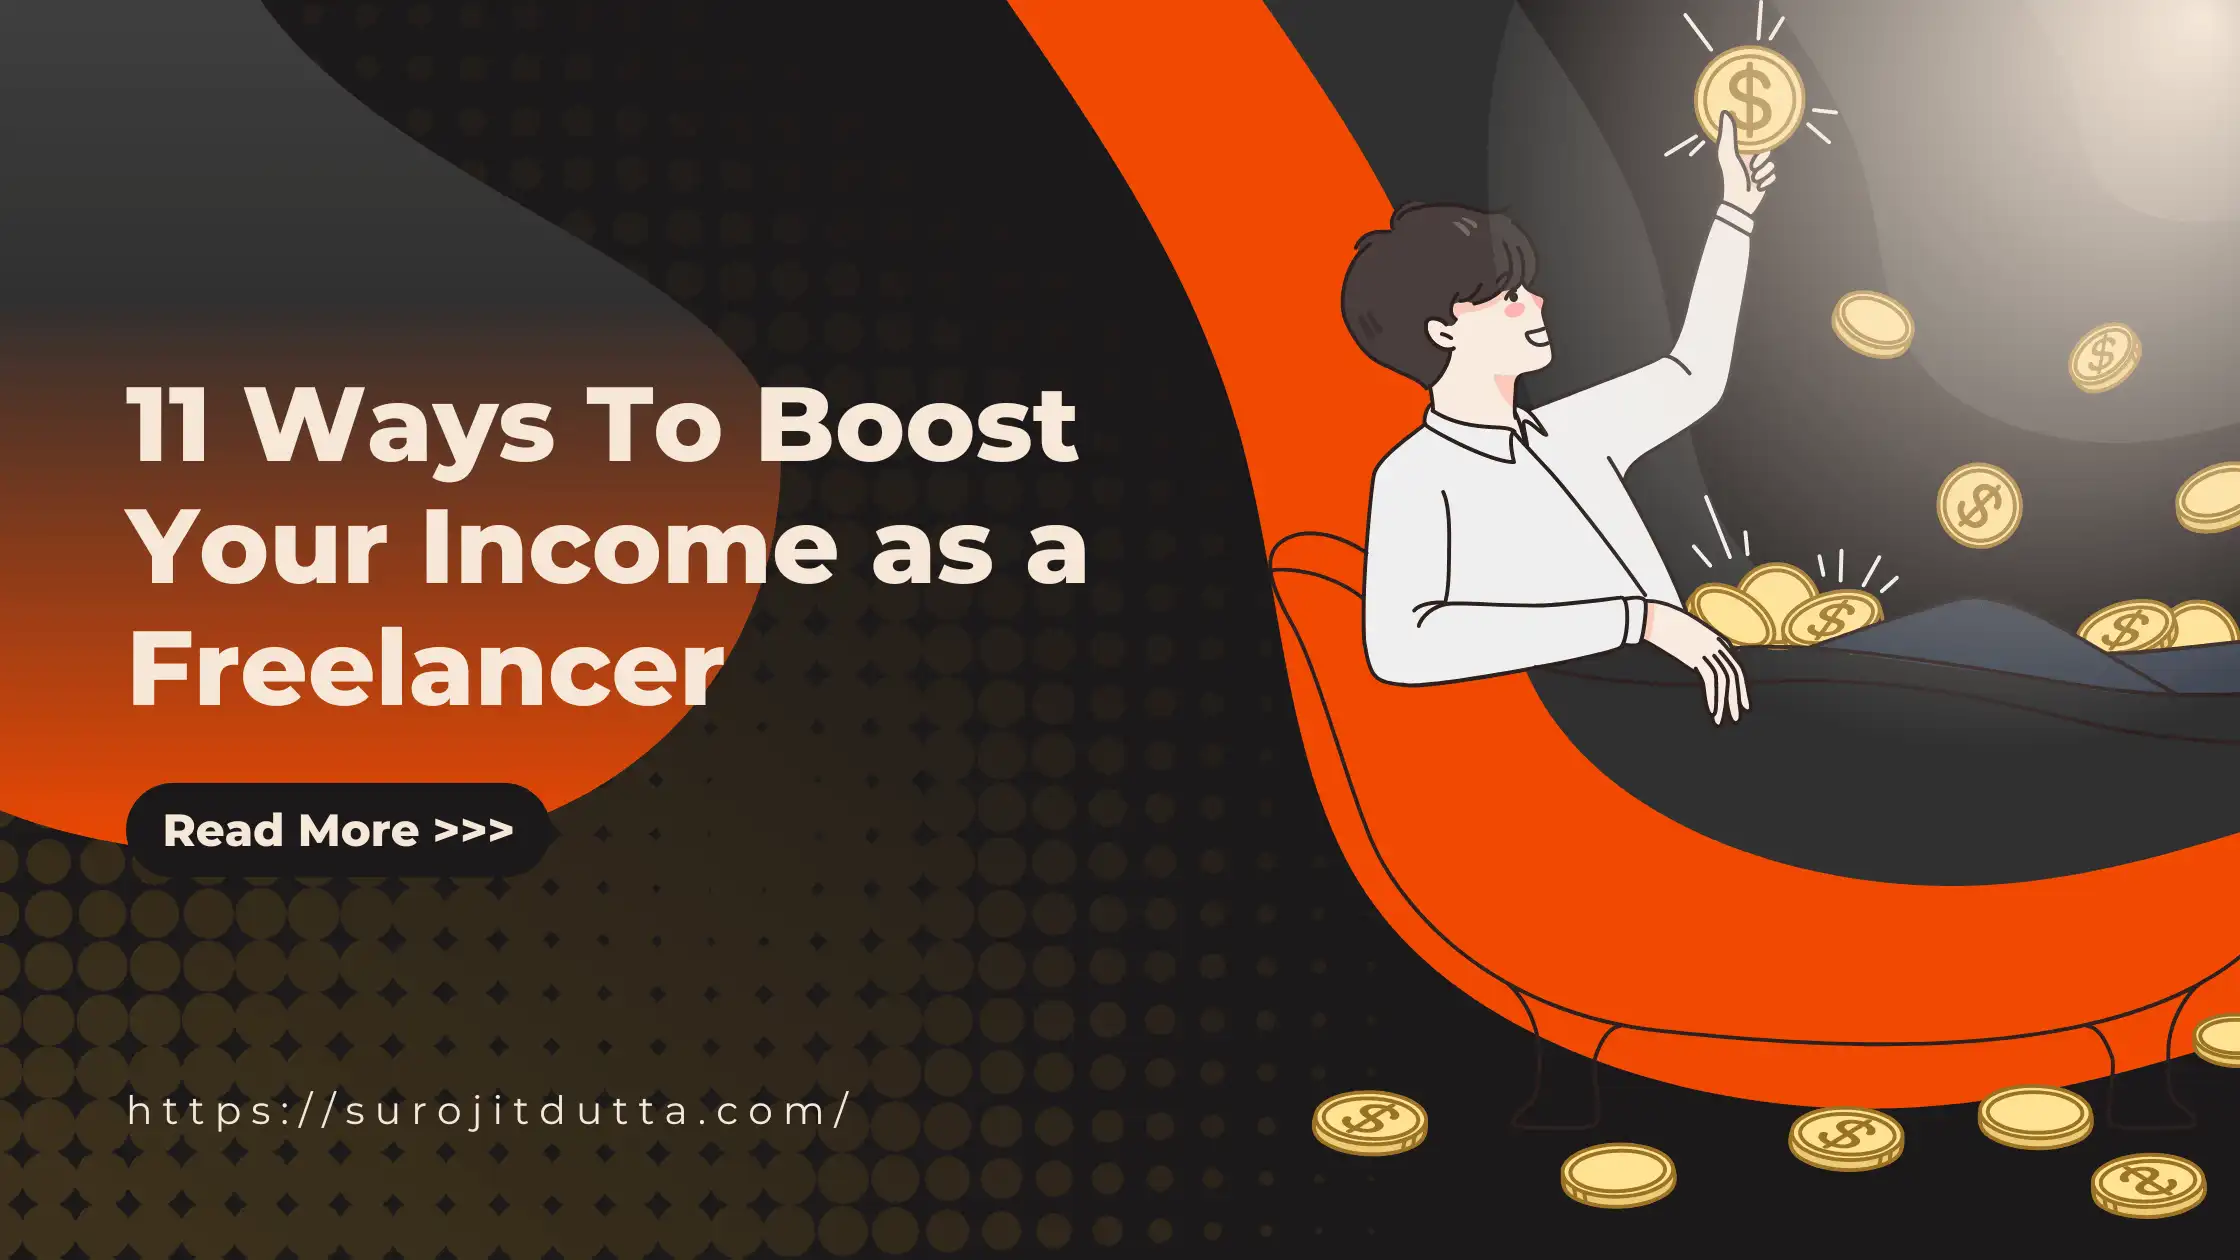 11 Ways To Boost Your Income as a Freelancer